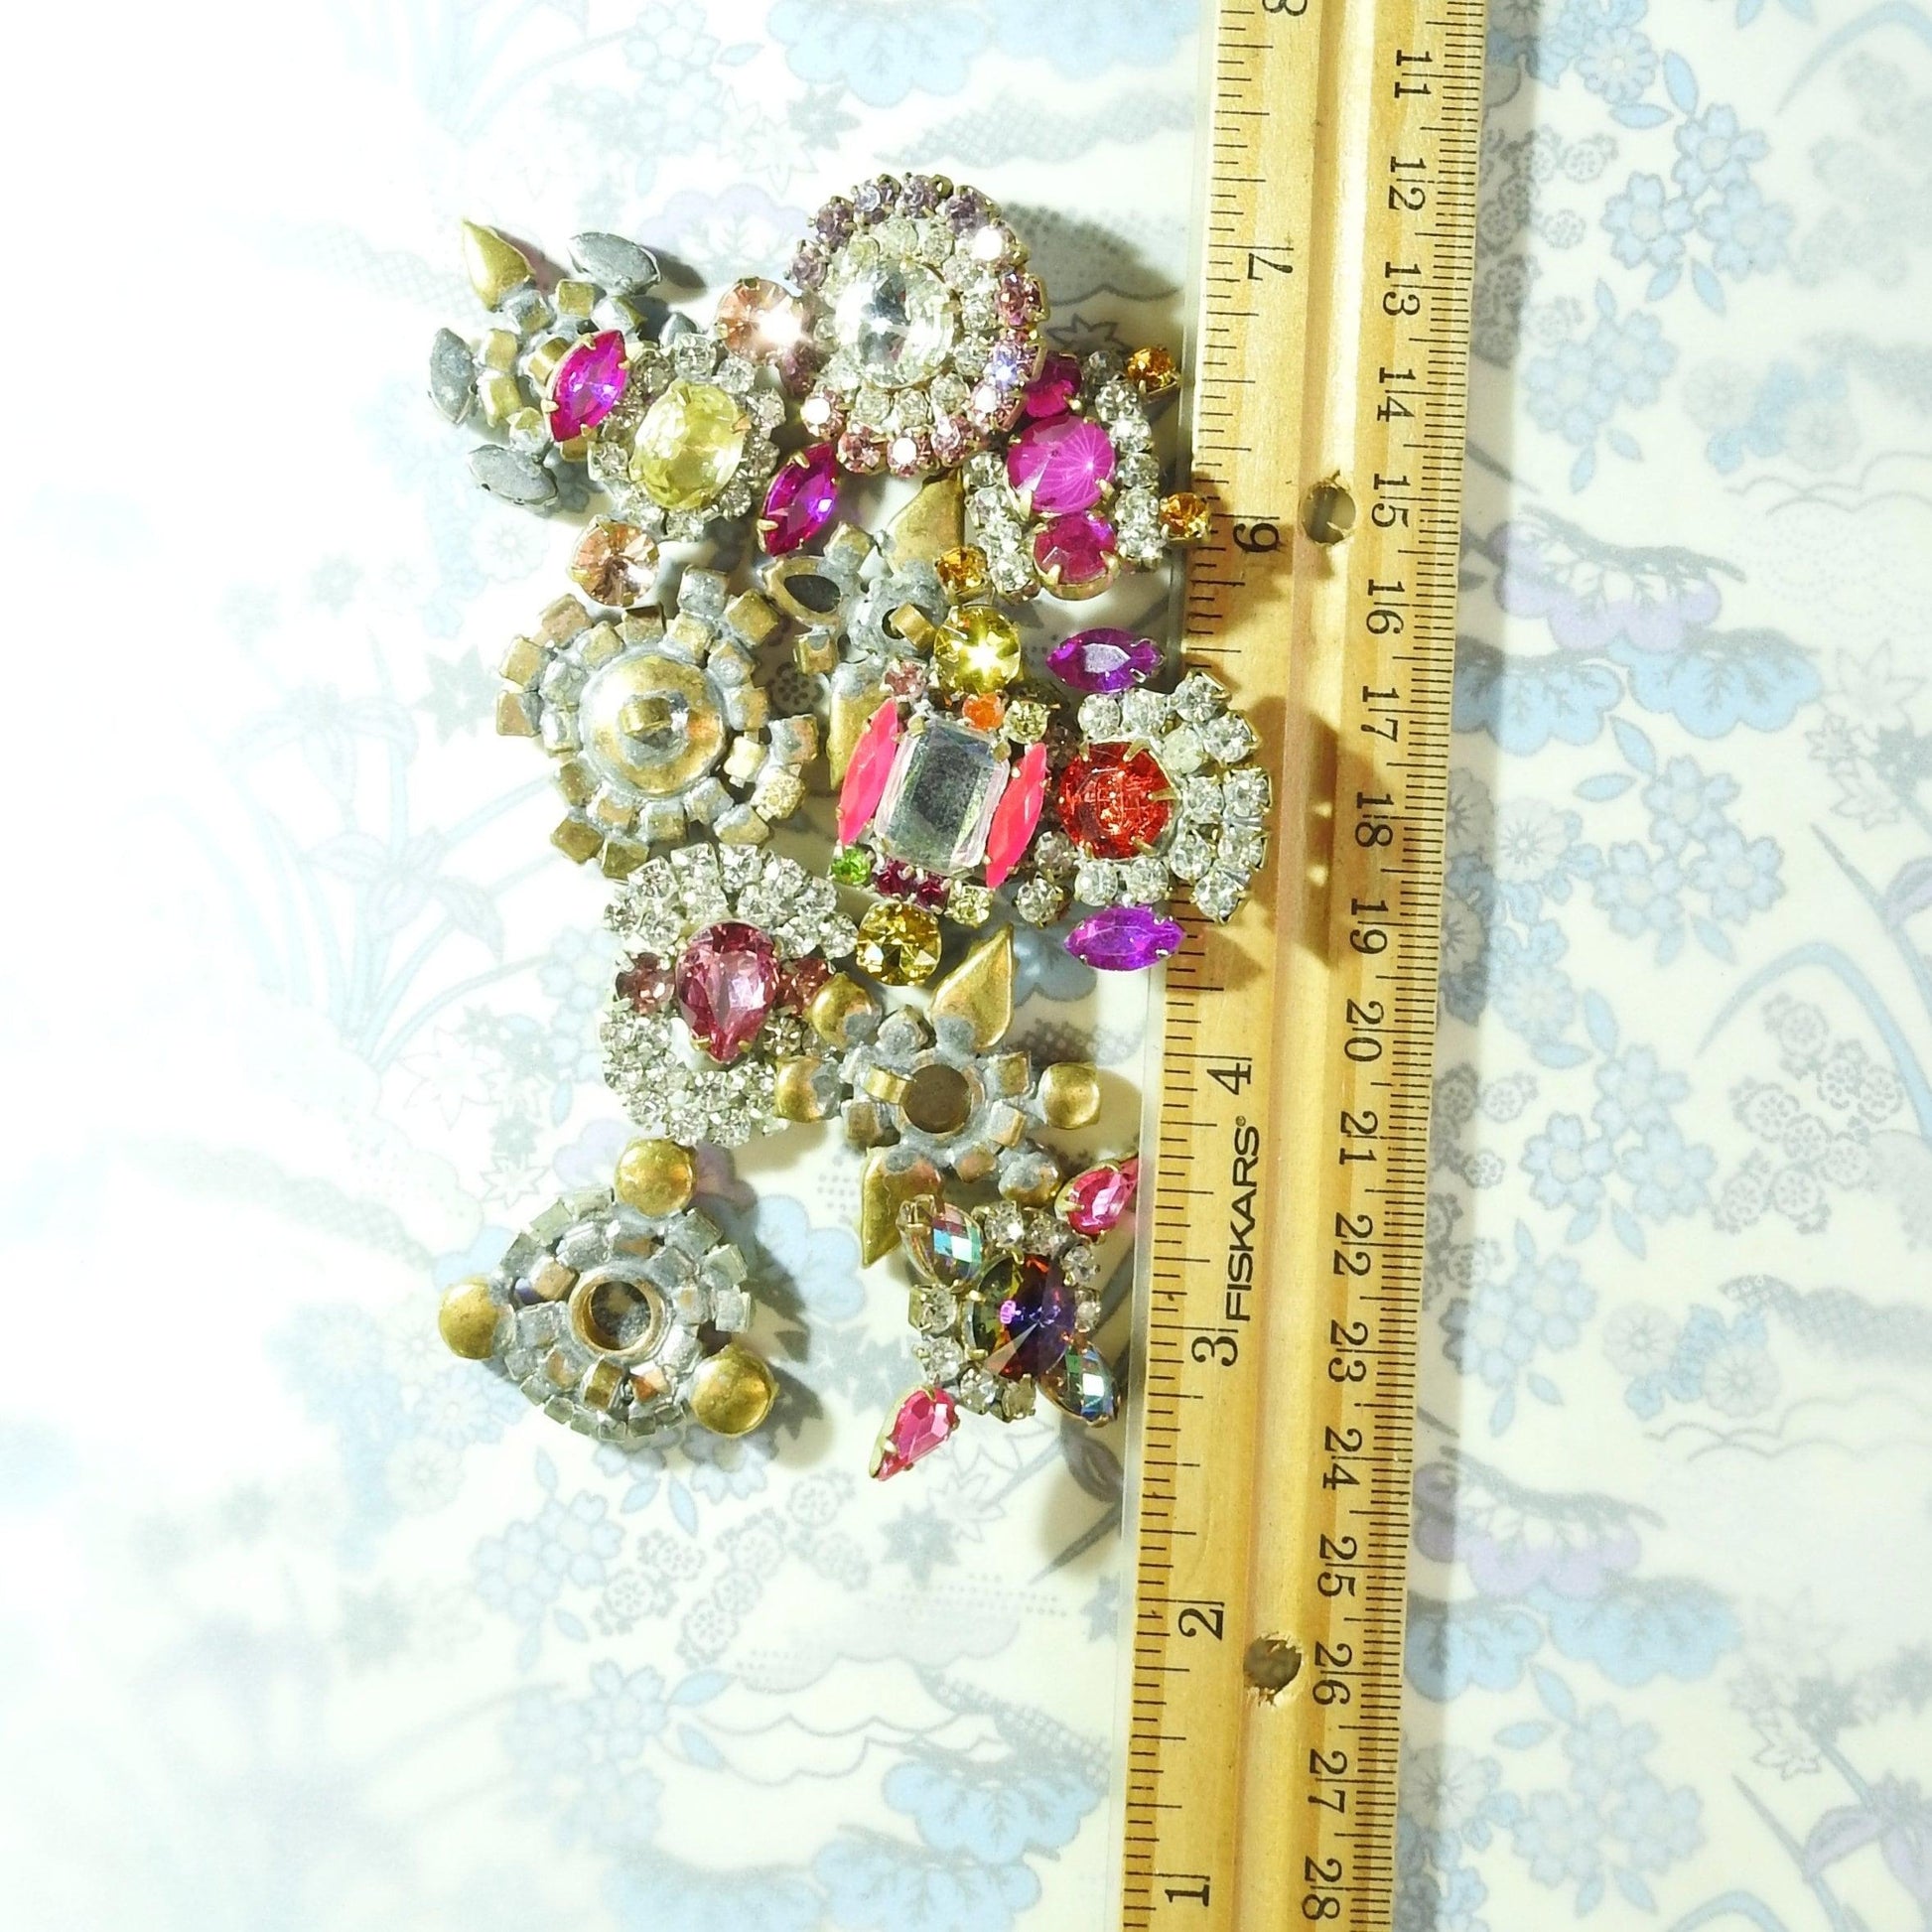 Pink rhinestone glass buttons with shank for jewelry; sewing on knitted garments, crochet projects, leather belts, fancy dresses. Lot of 12